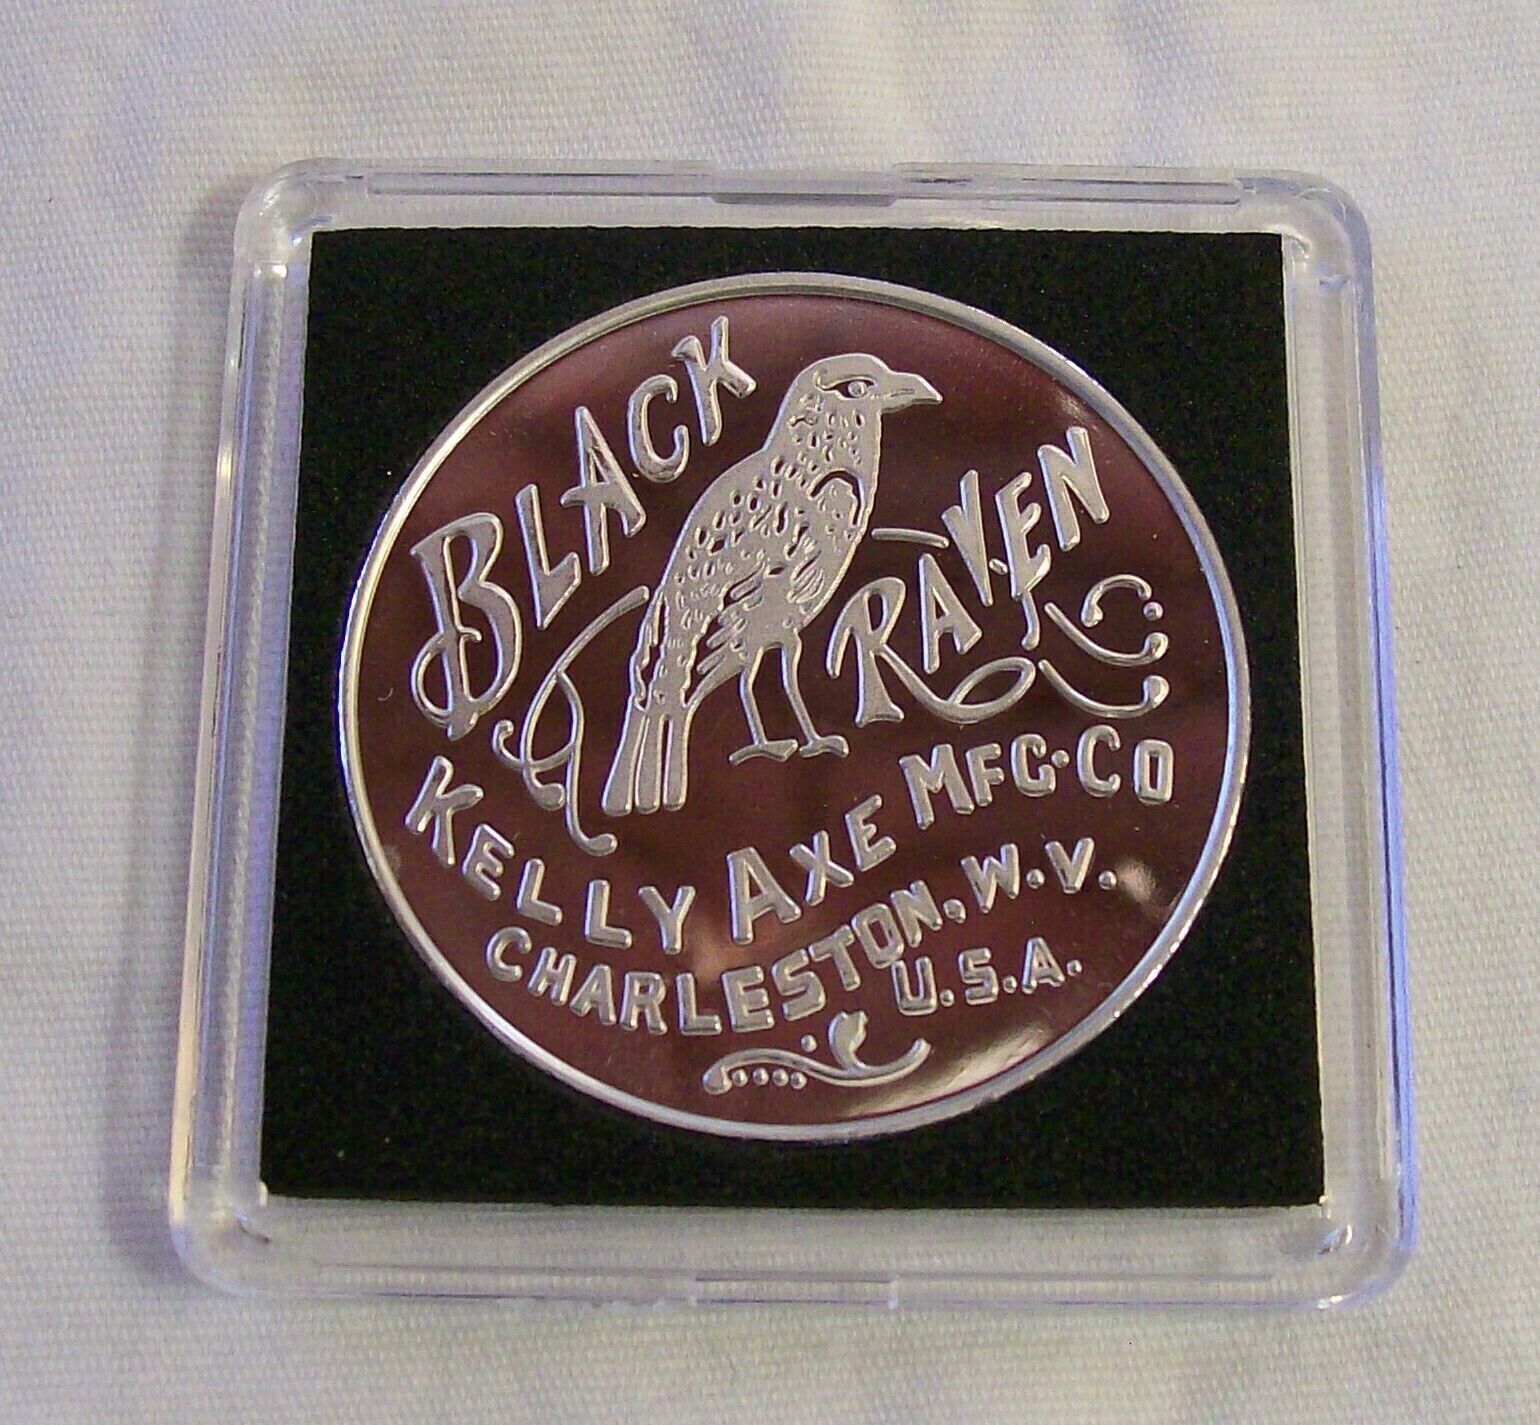 RARE BLACK RAVEN EMBOSSED AXE 1 OZ. PURE .999 SILVER ROUND PROOF COIN - #2/100